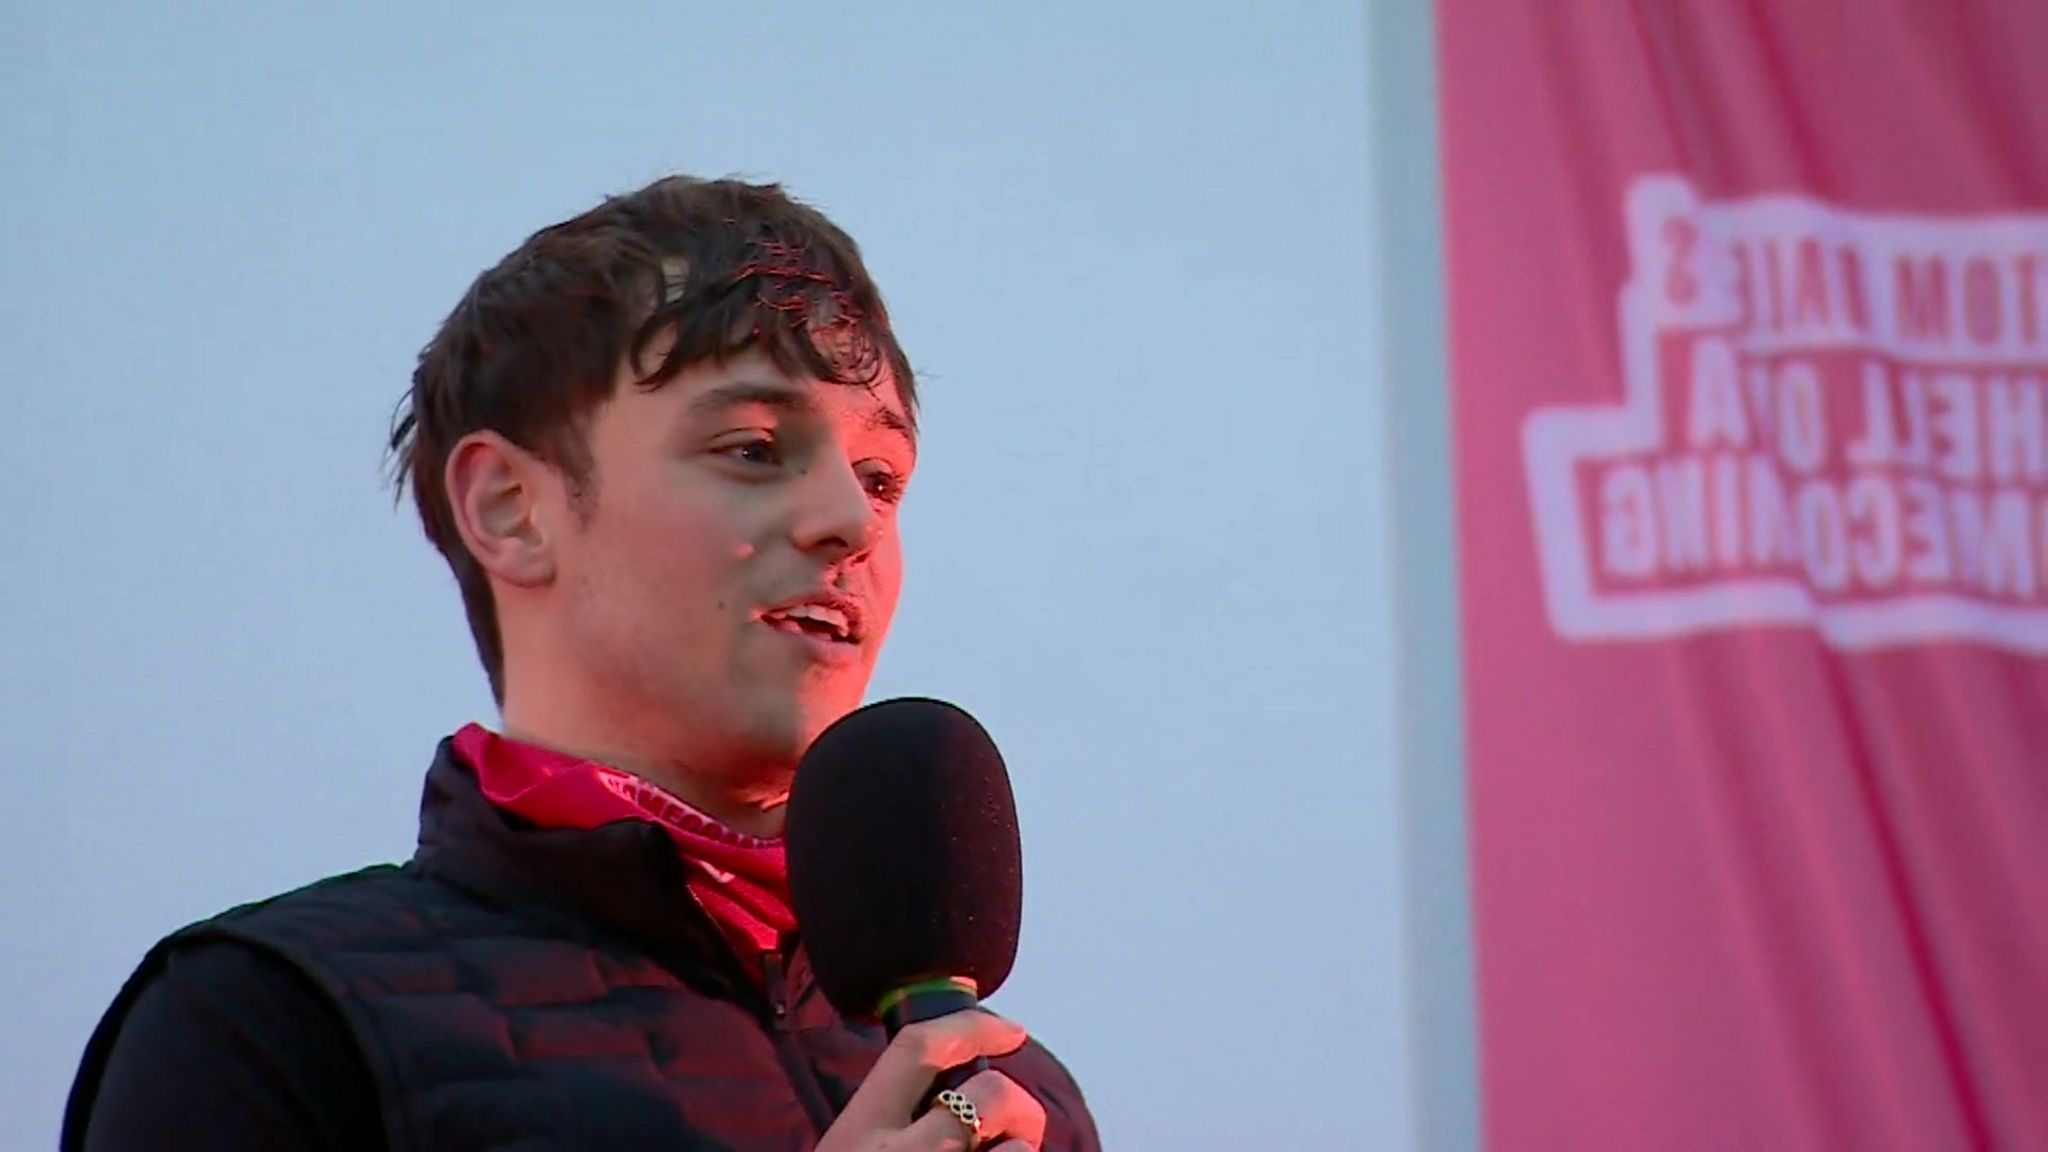 Tom Daley holding microphone